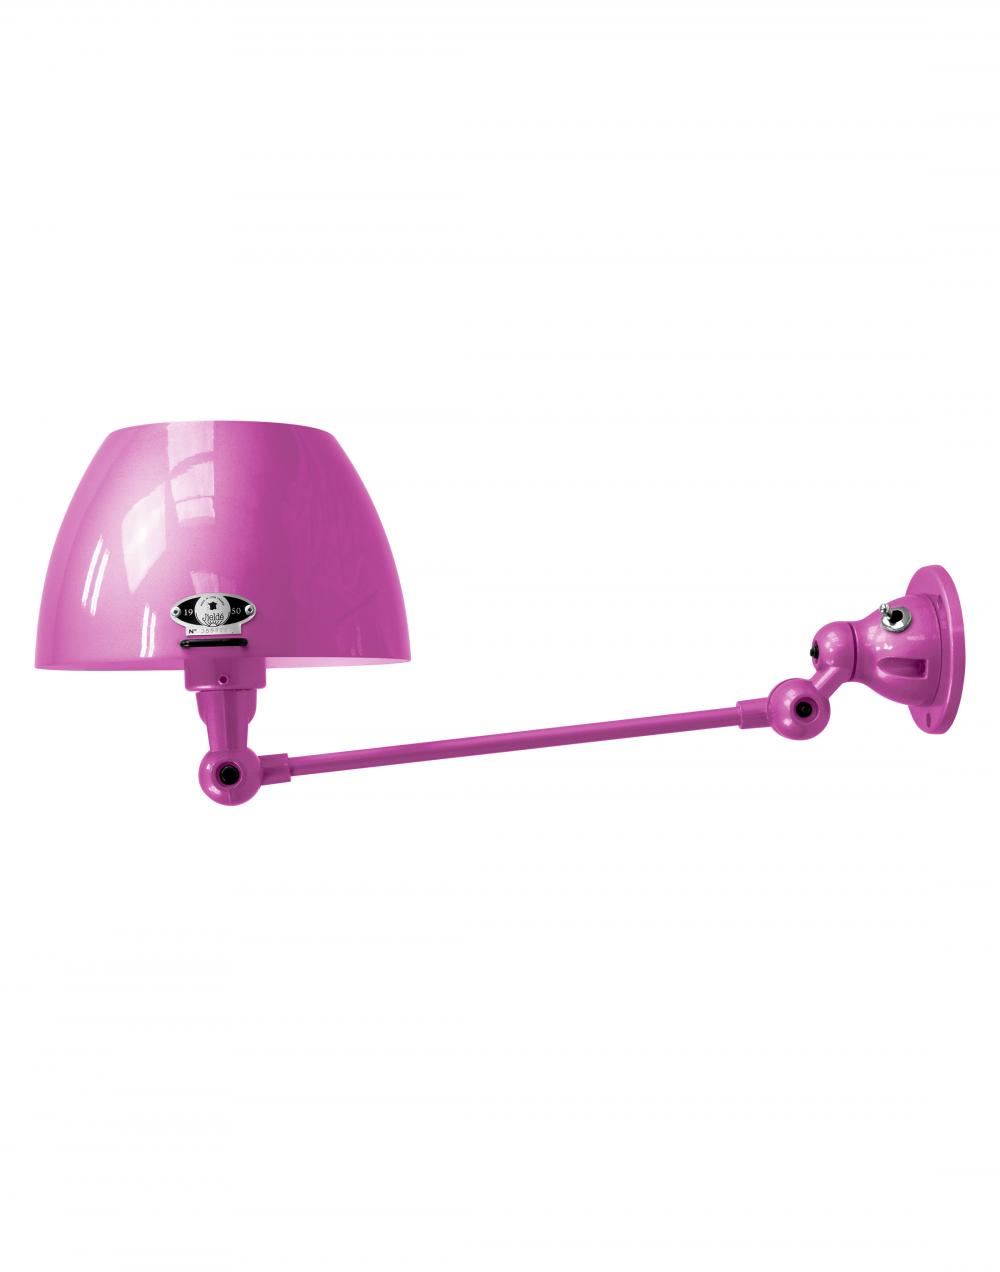 Jielde Aicler One Arm Adjustable Wall Light Curved Shade Violet Fuchsia Matt Hardwired No Switch